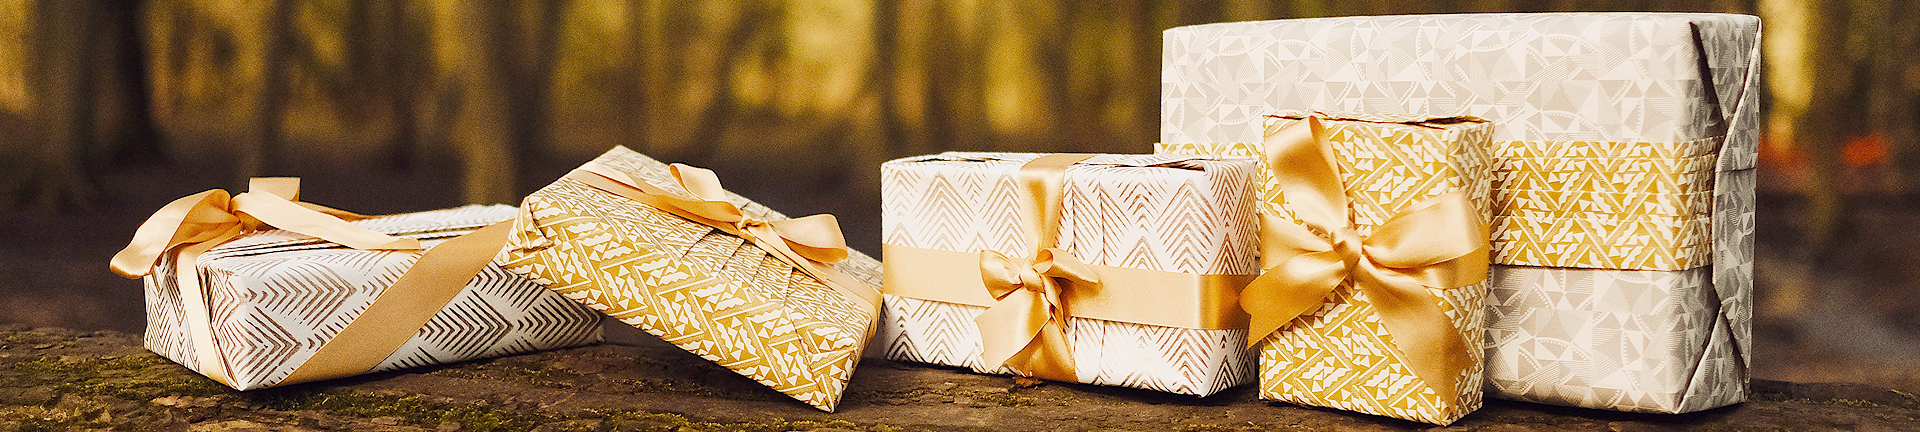 Gold and white gifts professionally wrapped in premium environmentally friendly wrapping paper 